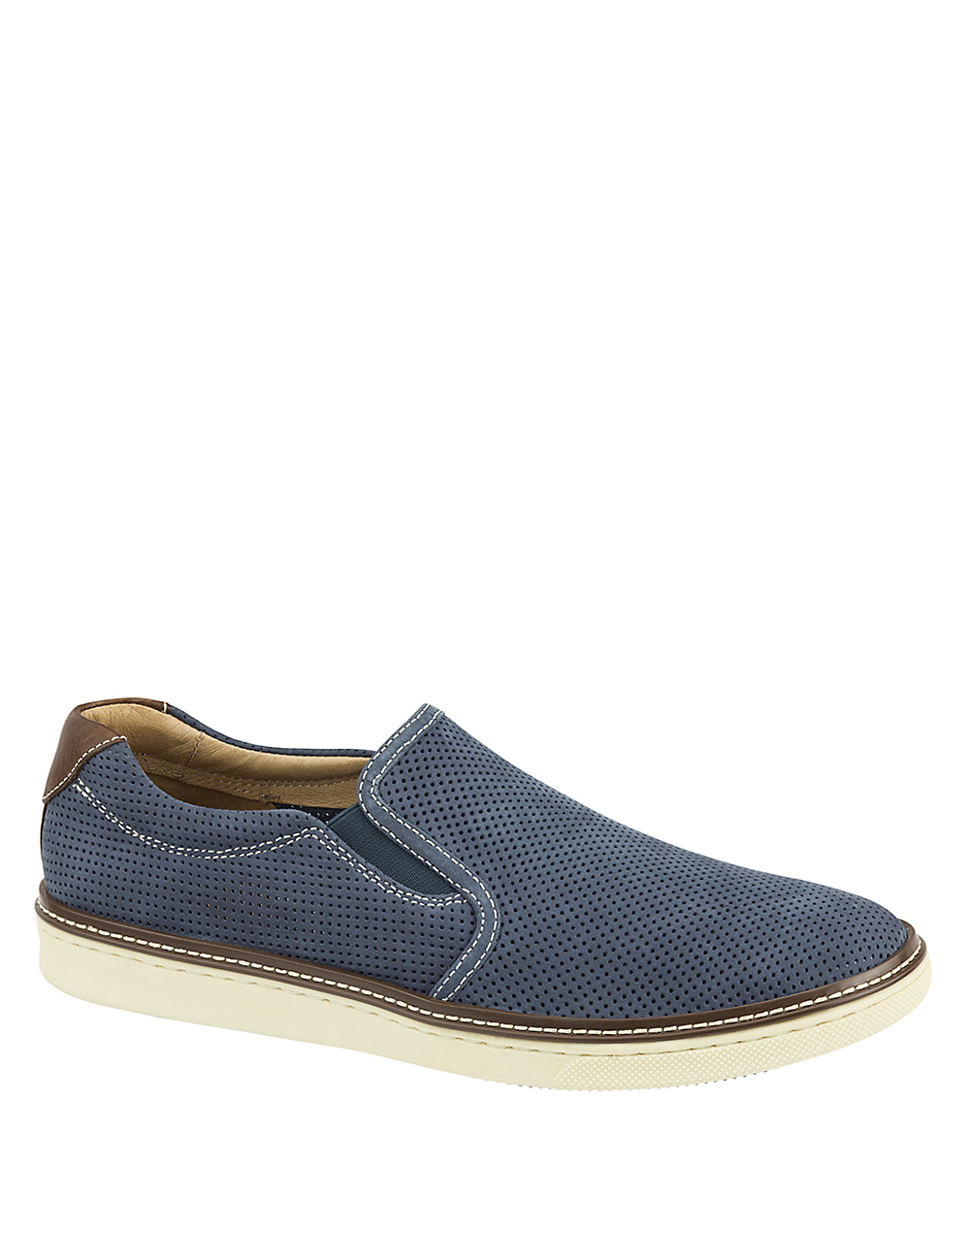 Johnston & Murphy Mcguffey Perforated Leather Slipon Shoes in Blue for ...